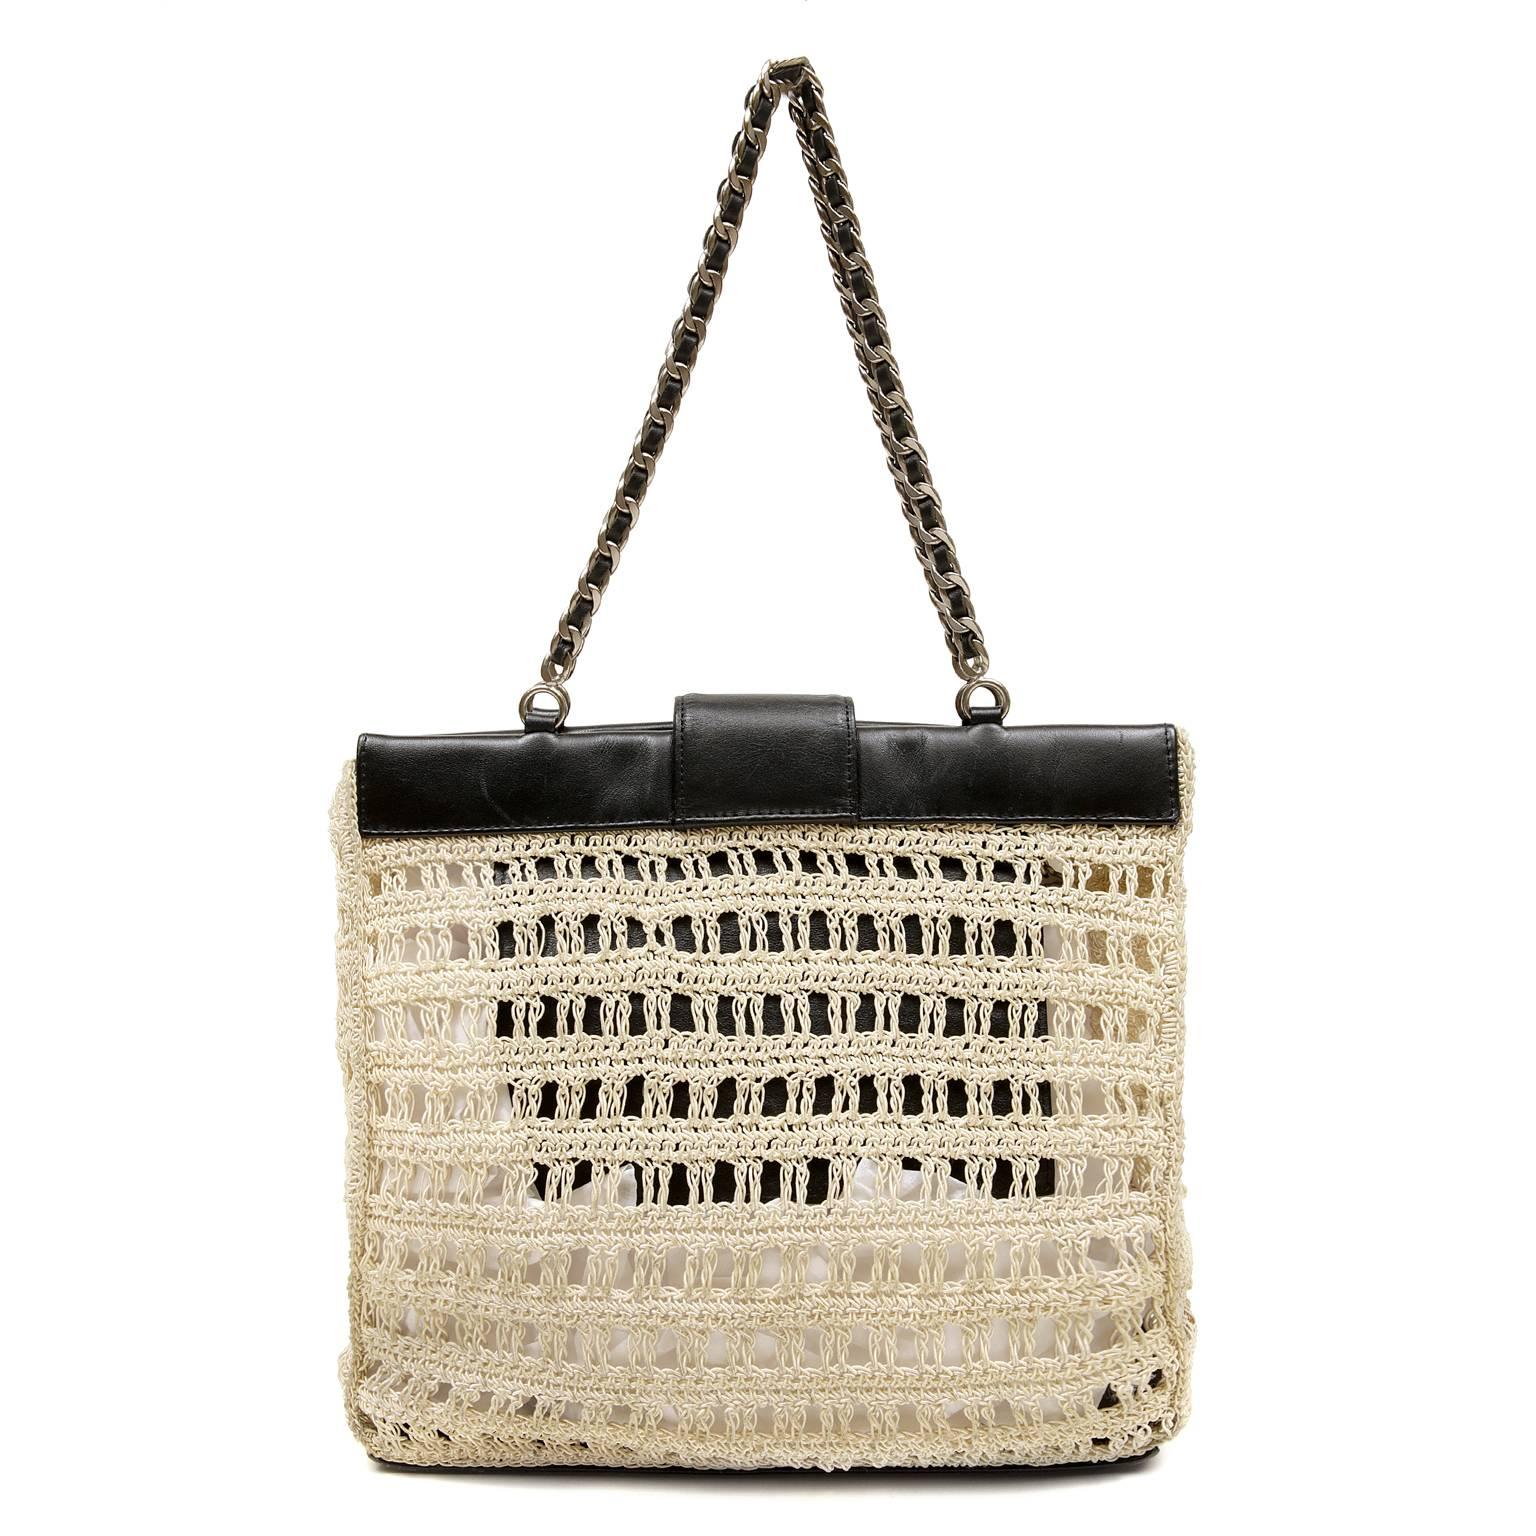 Chanel Beige Crocheted and Black Leather Tote Bag In Excellent Condition For Sale In Malibu, CA